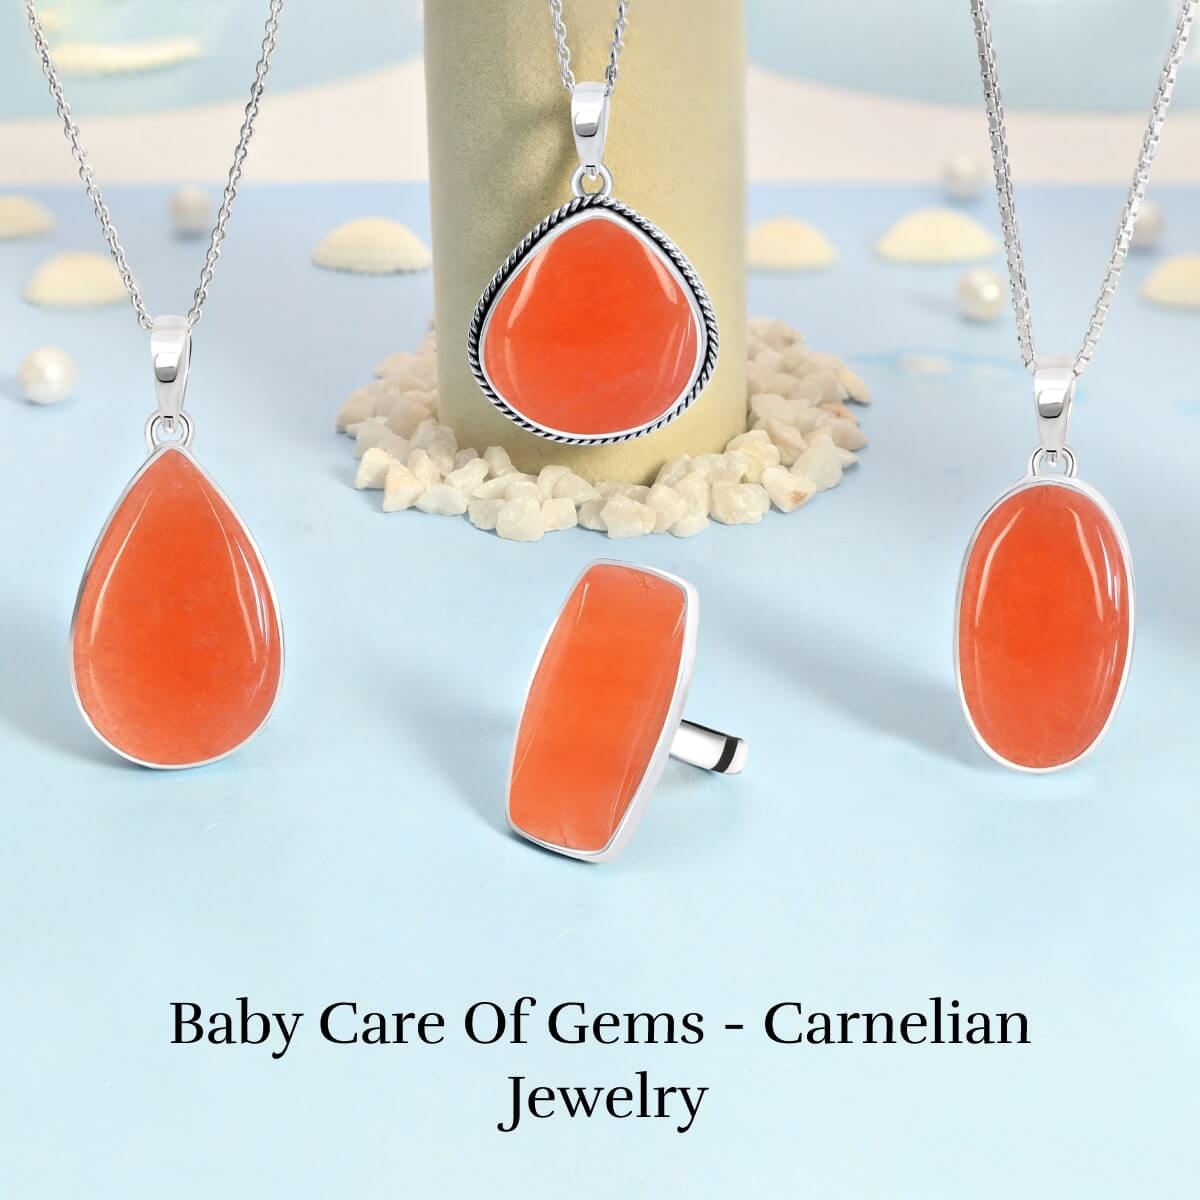 Pampering & Charging for Carnelian Jewelry